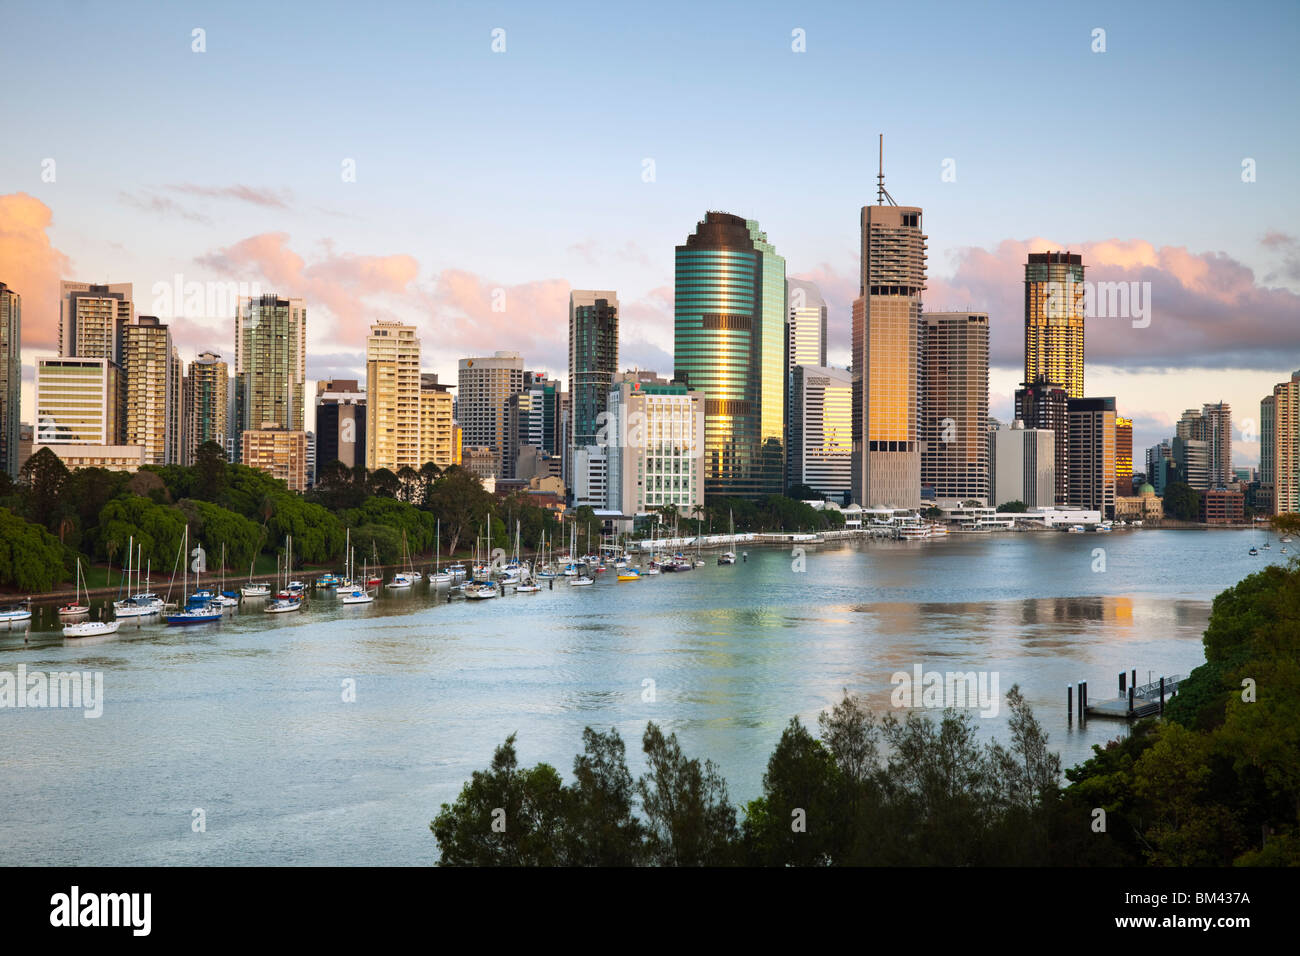 View Of The City Skyline From Kangaroo Point At Dawn Brisbane Queensland BM437A 